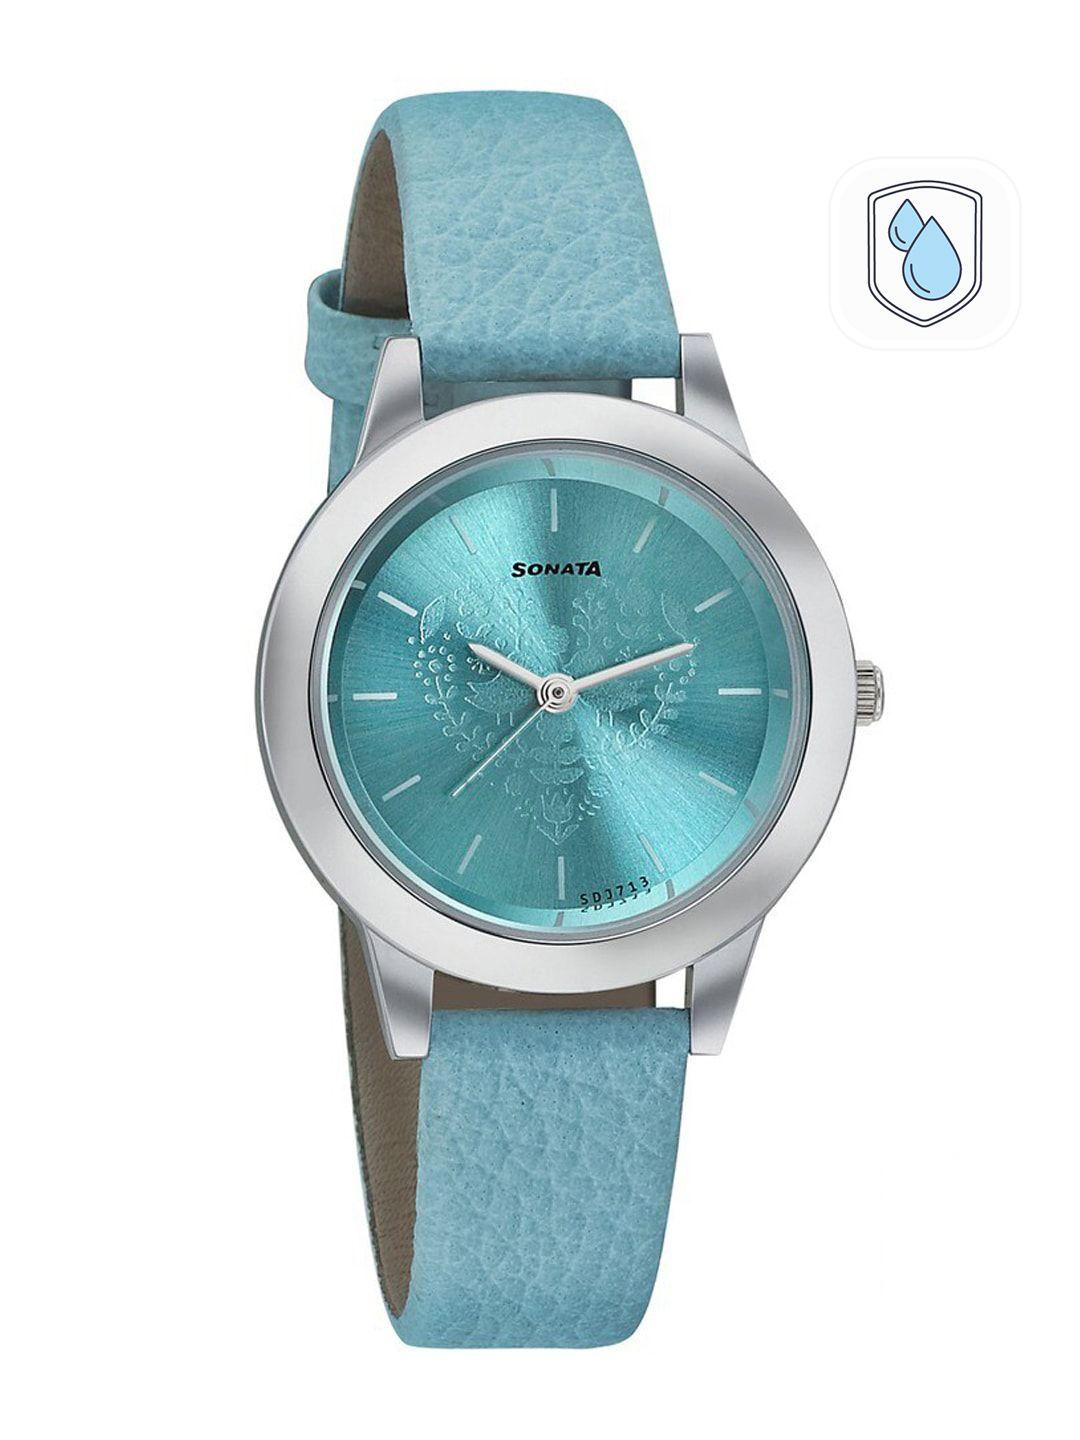 sonata women turquoise blue patterned dial analogue watch nn87019sl09w